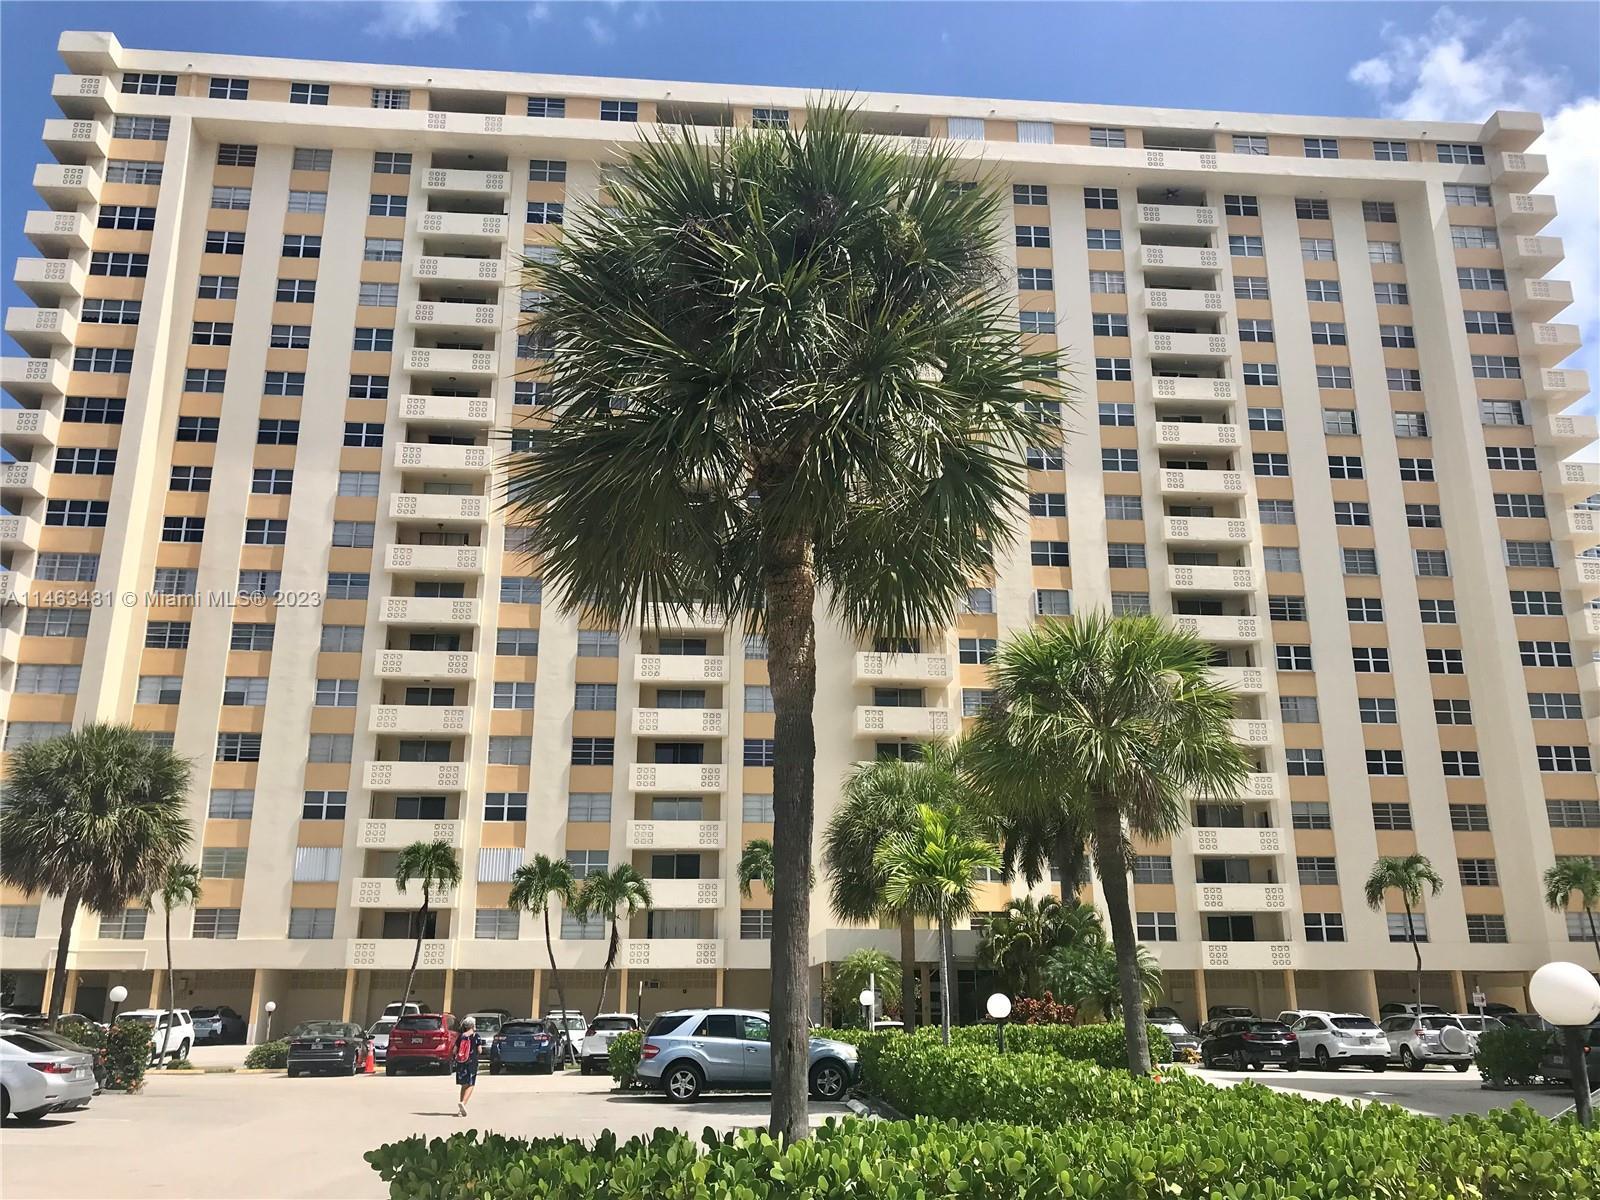 Two bedrooms with two full bathrooms, located in Hallandale Beach. Across from the Ocean/Beach, City